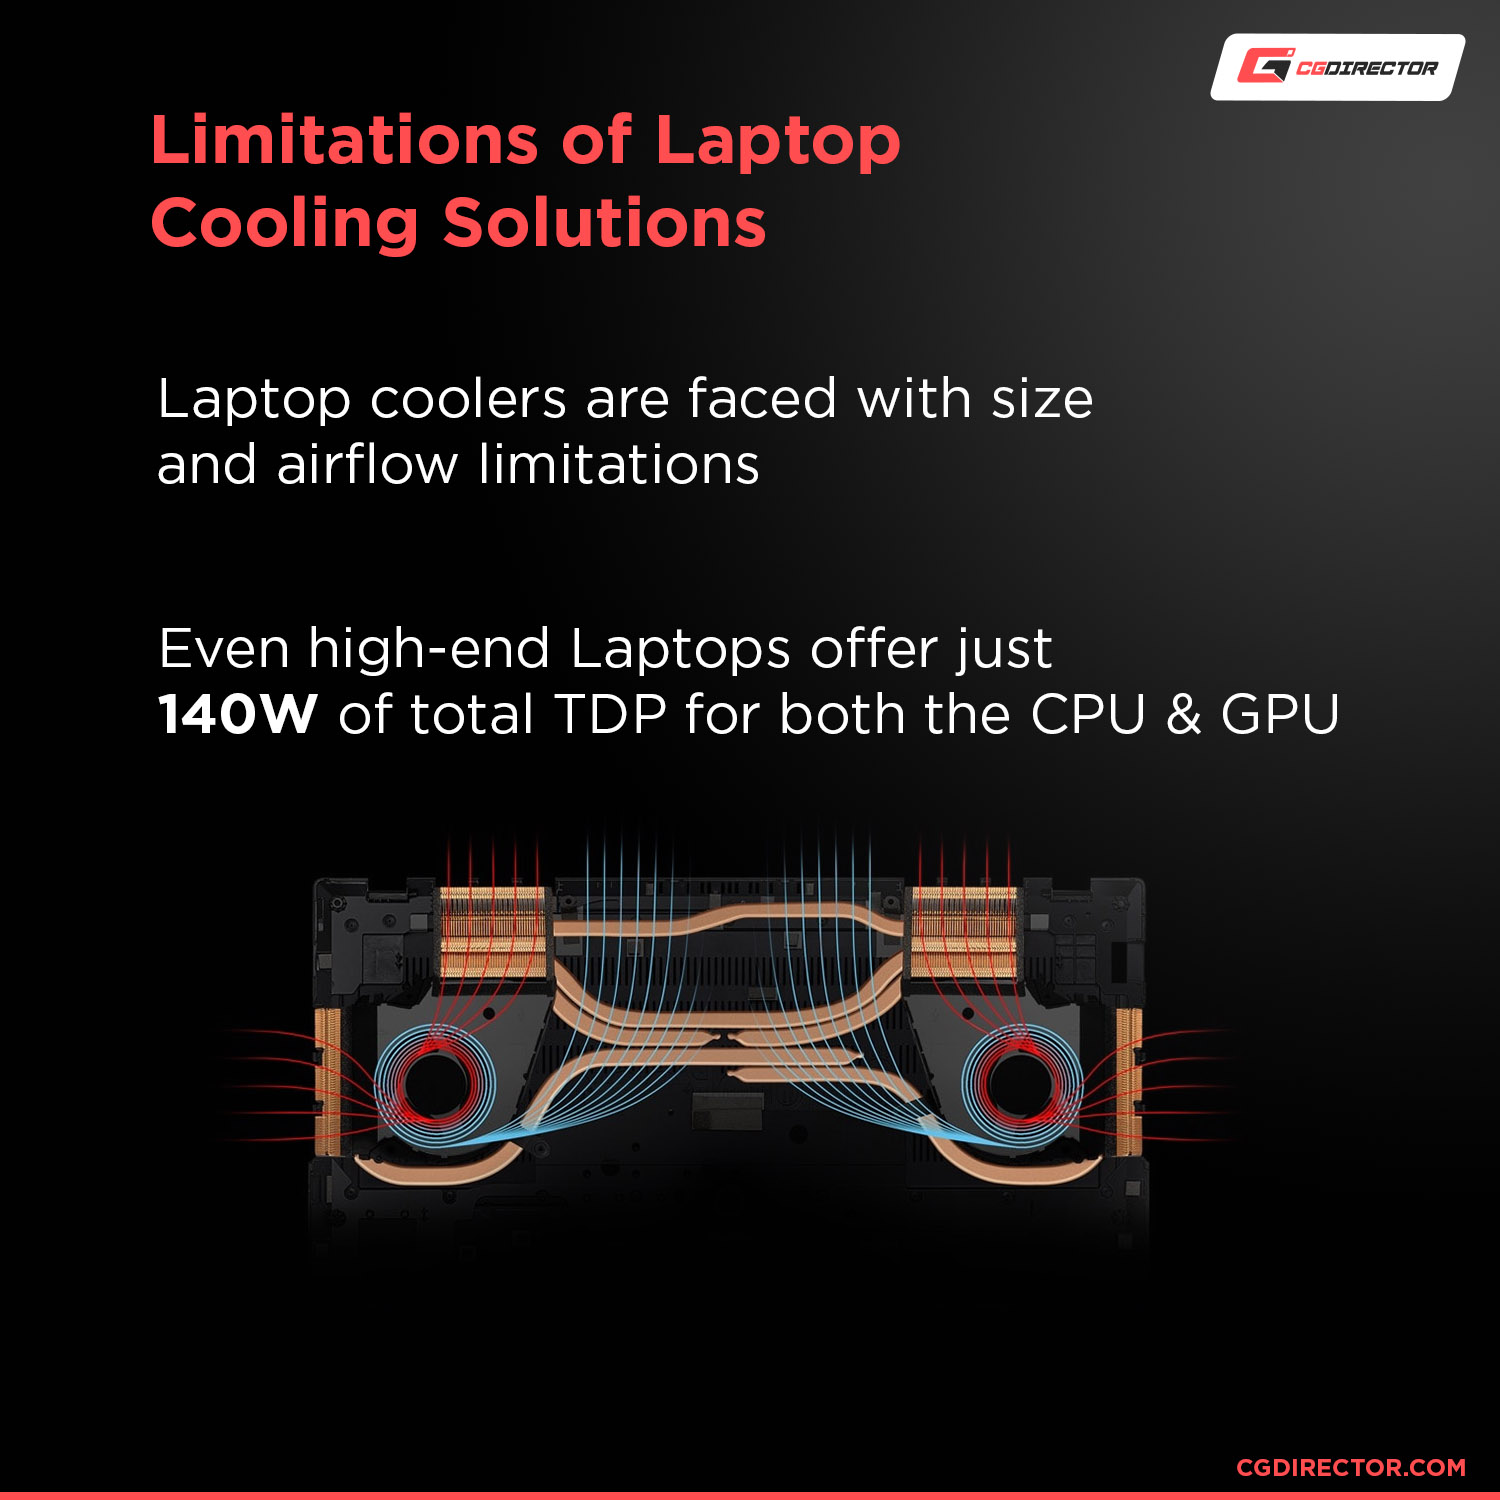 Limitations of Laptop cooling solutions